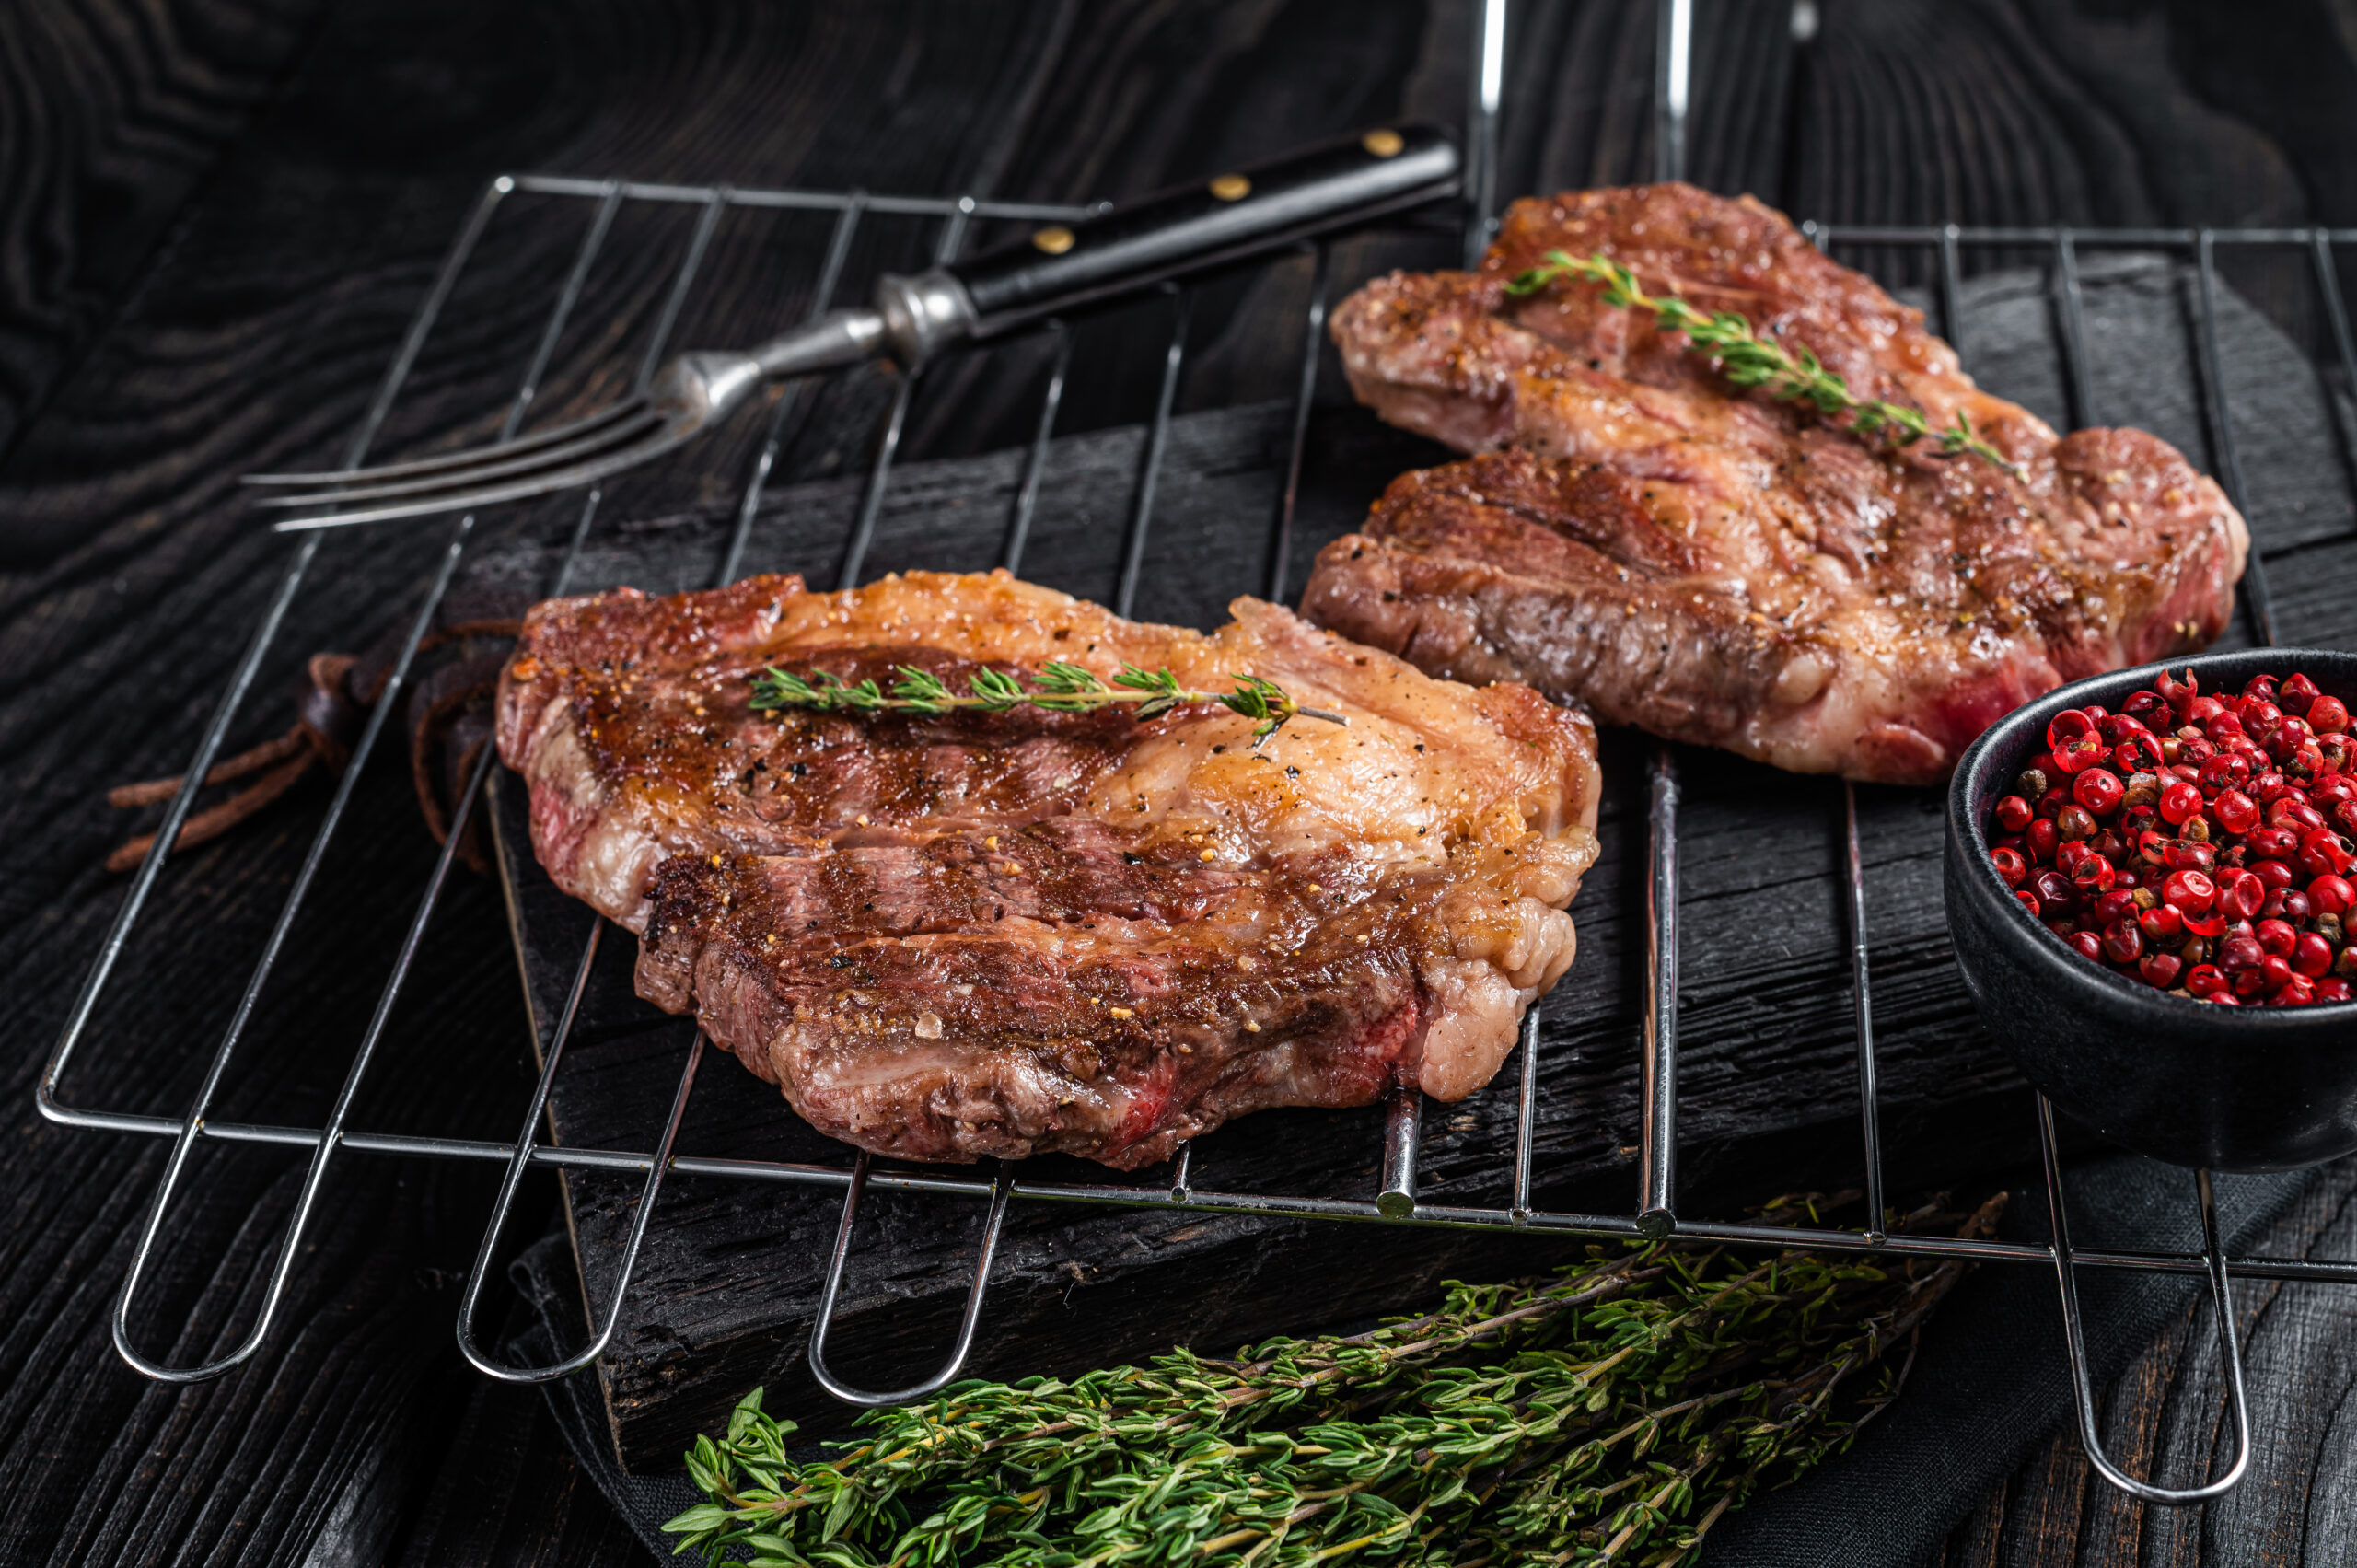 How To Cook Chuck Steak On Grill